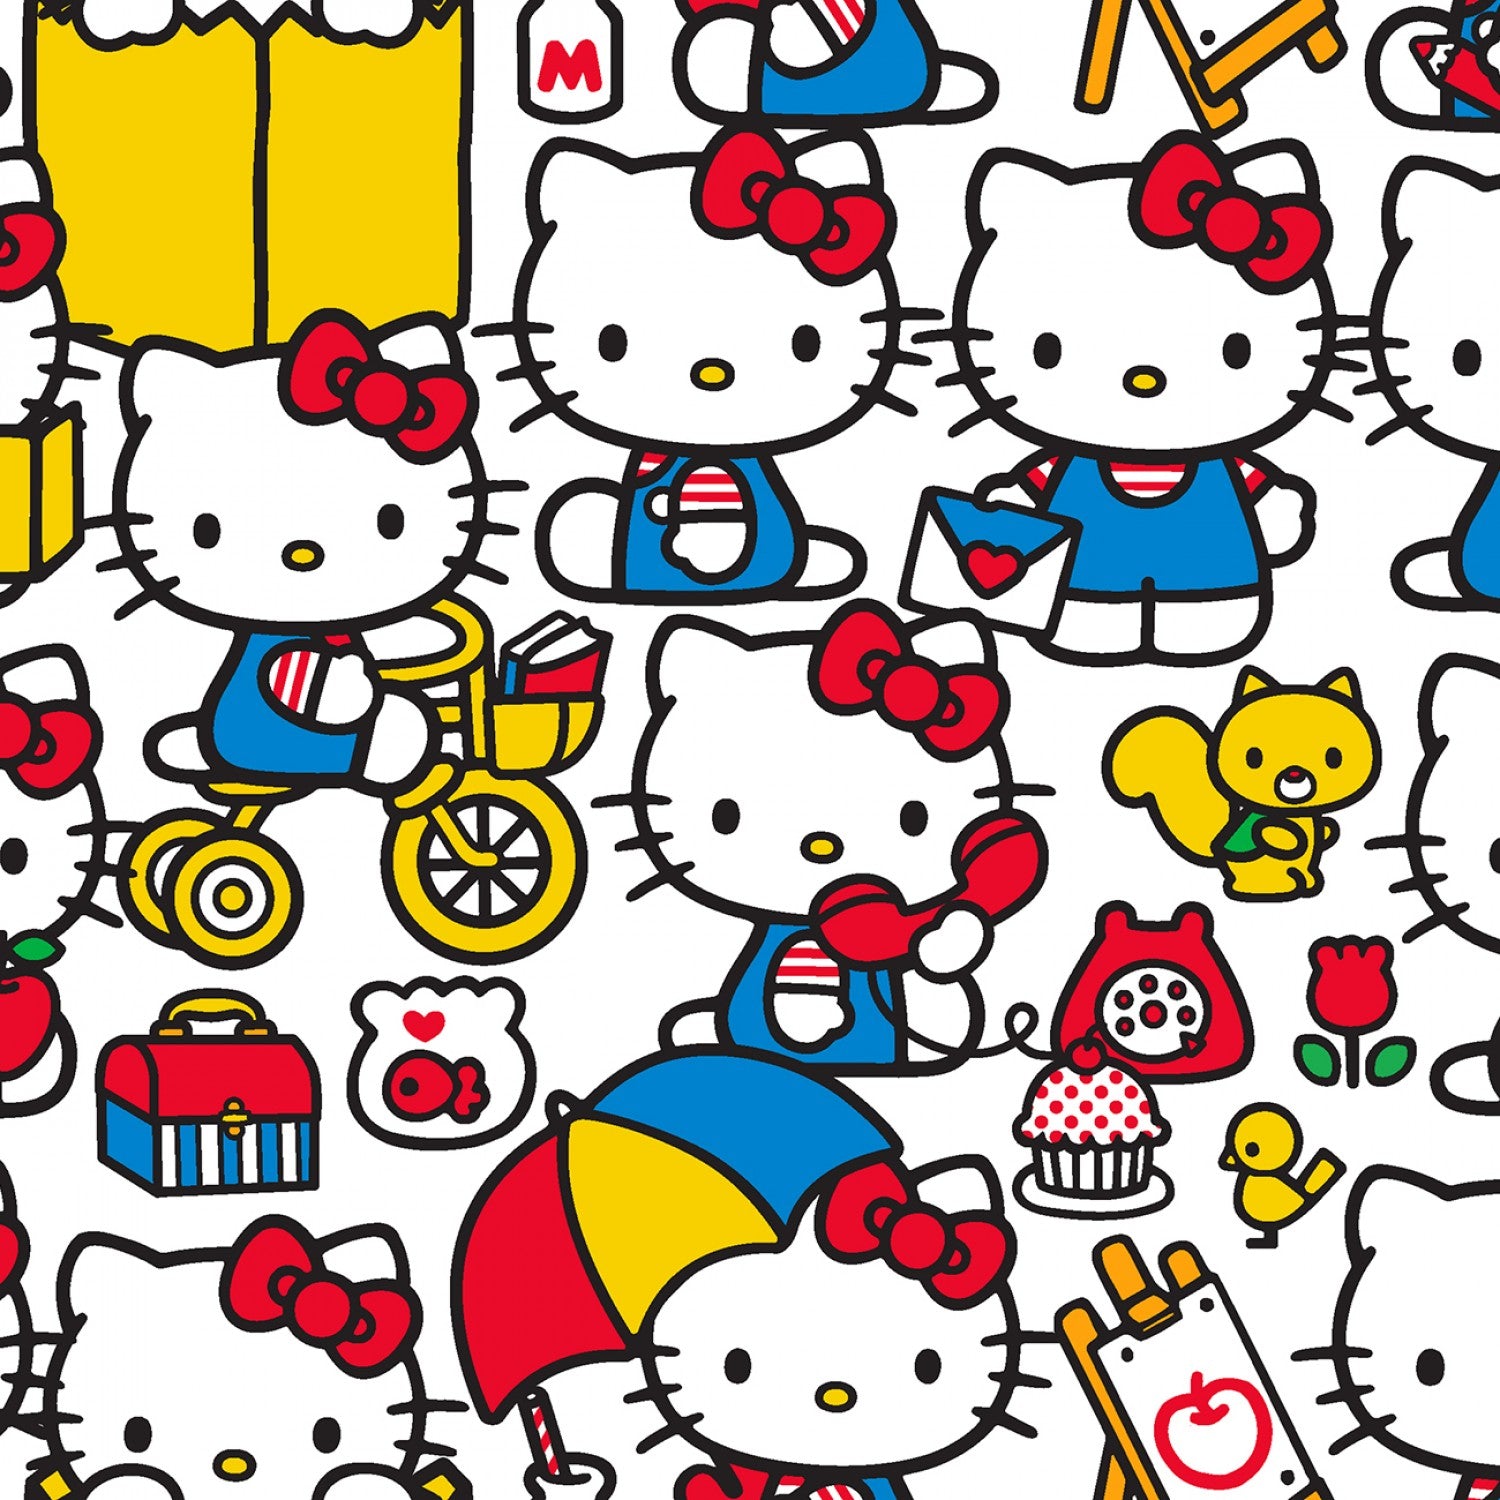 Hello Kitty Friends Pack Cotton Fabric